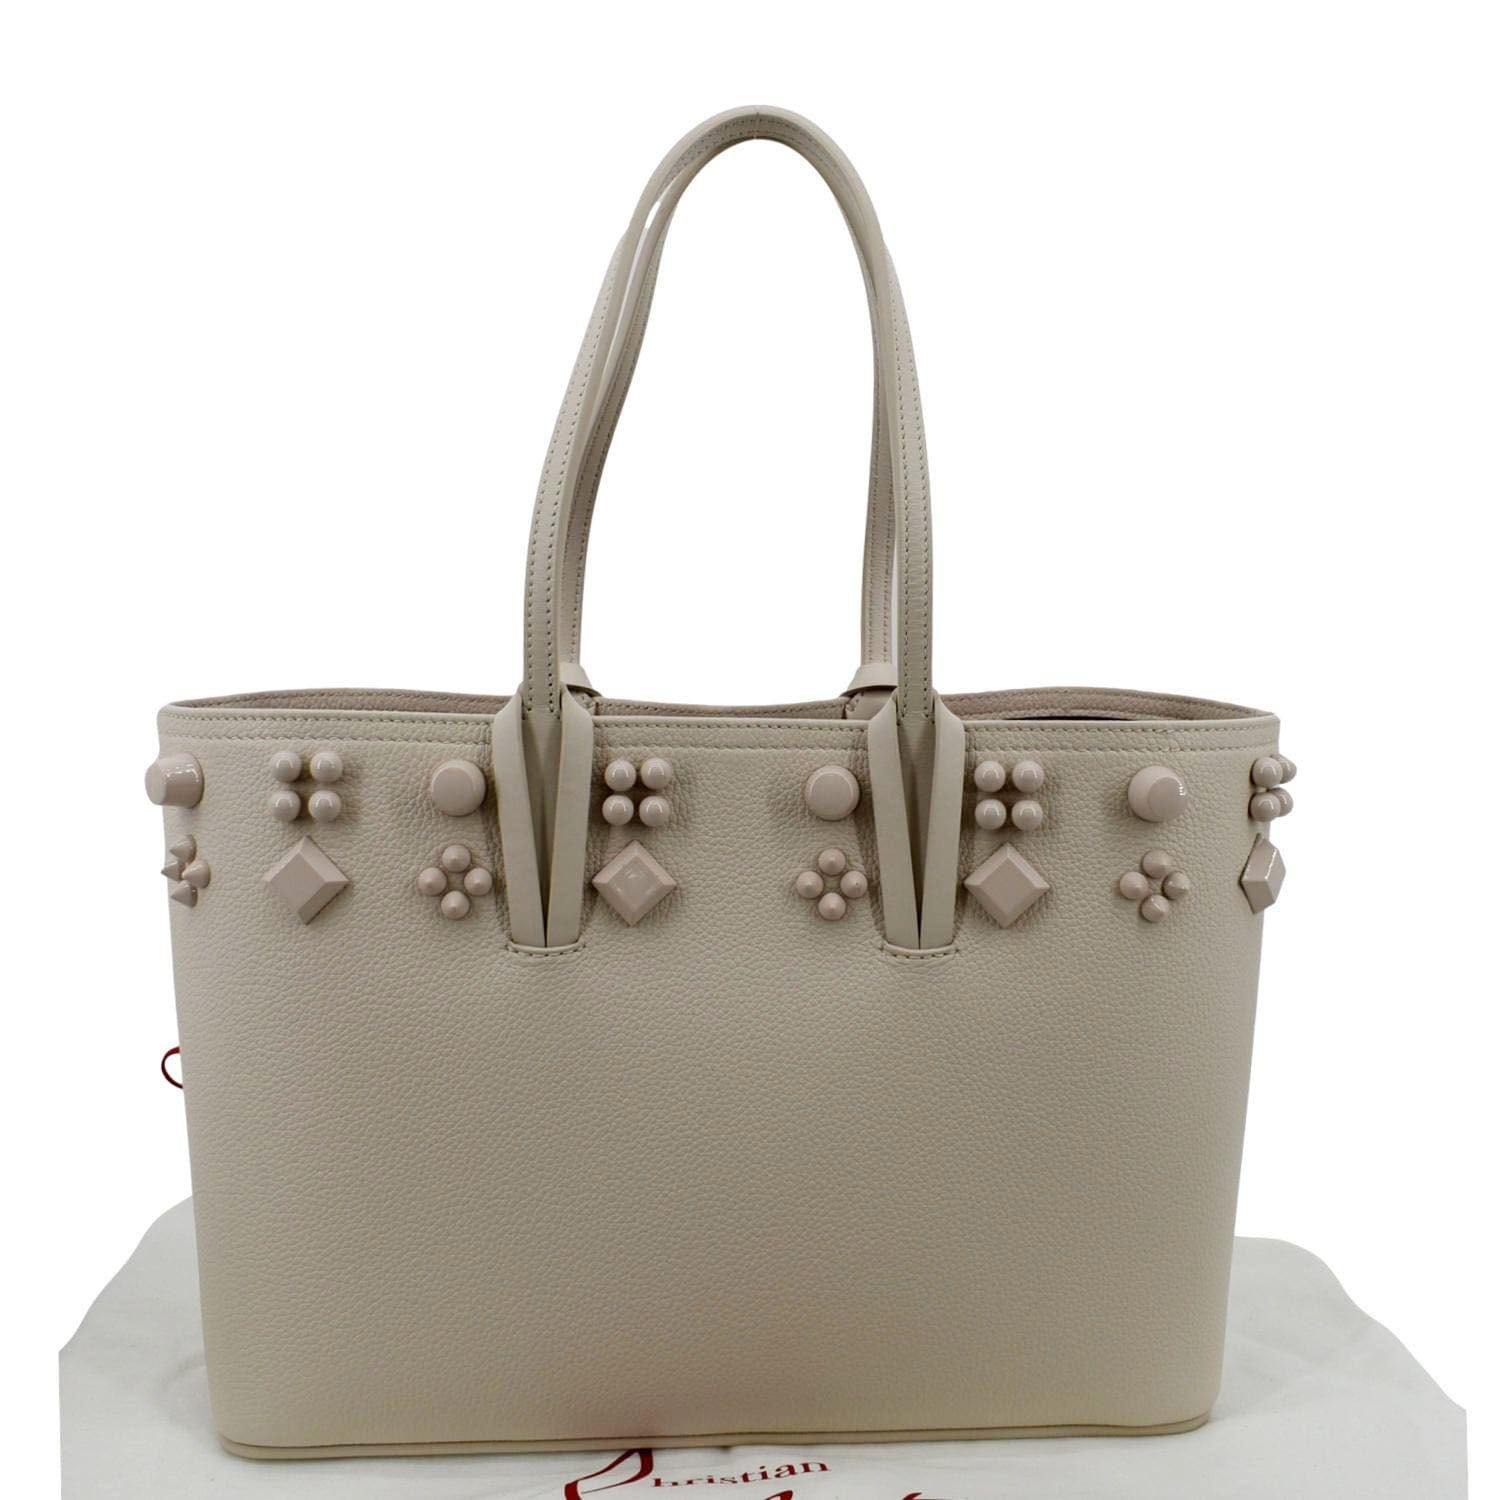 Cabata Small Leather Tote Bag in Beige - Christian Louboutin